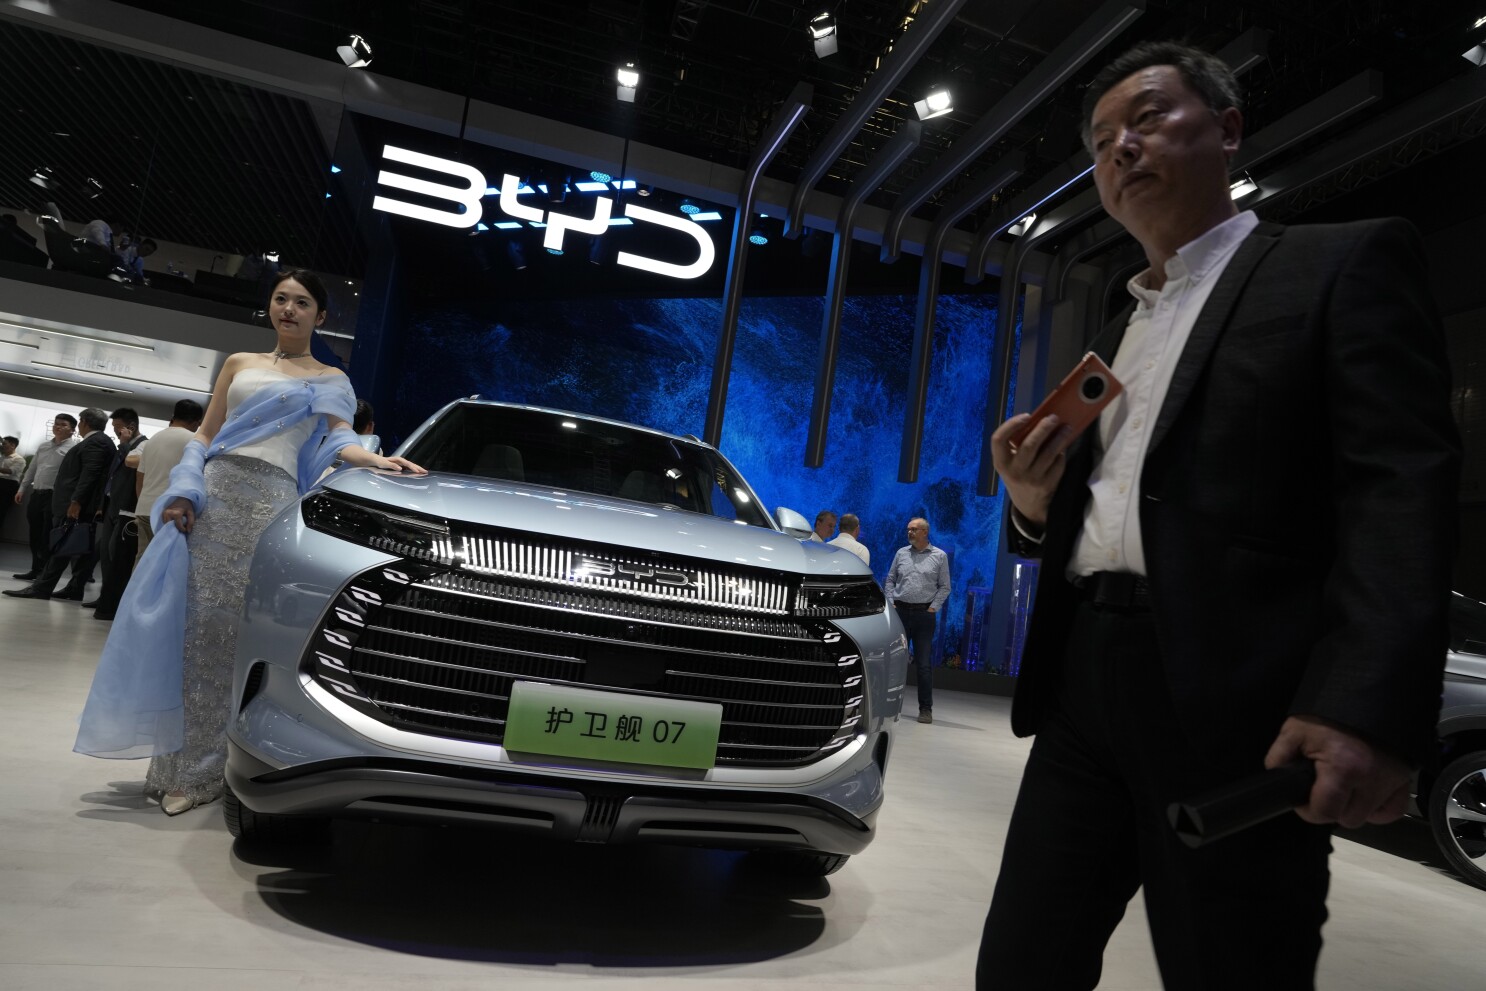 China Sets New Record In EV Deliveries: BYD And Li Auto Lead The Way - Doo  Prime News